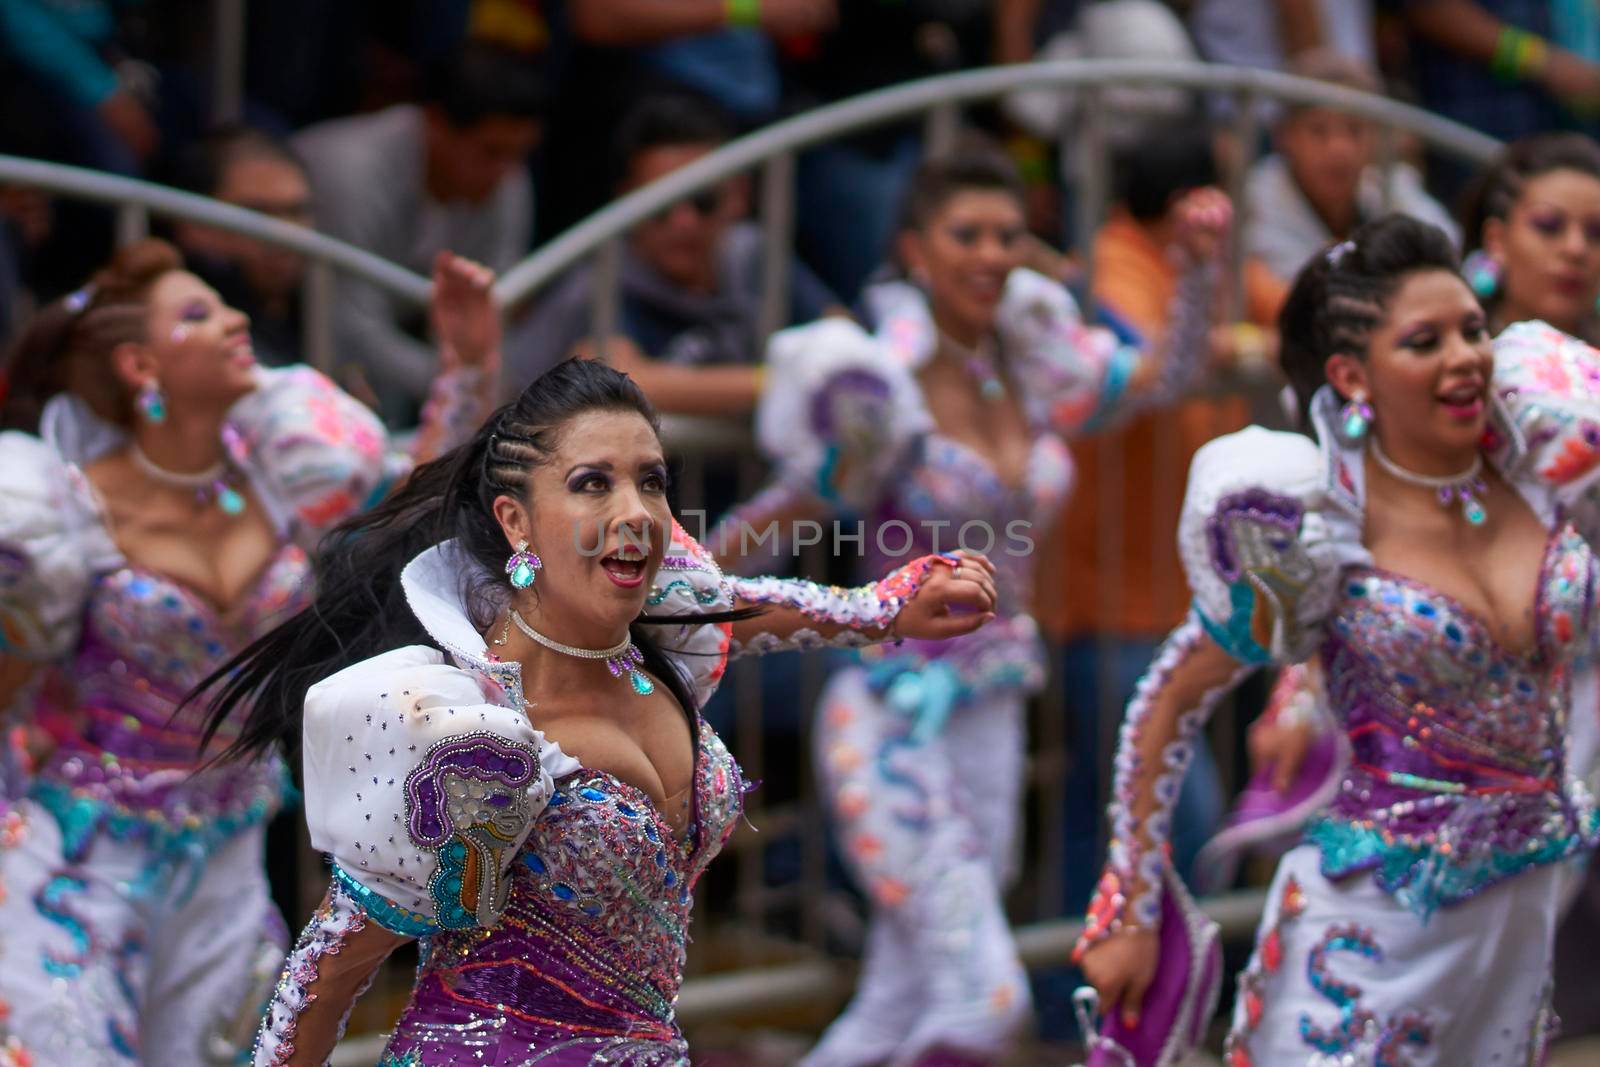 Caporales dancers at the Oruro Carnival by JeremyRichards